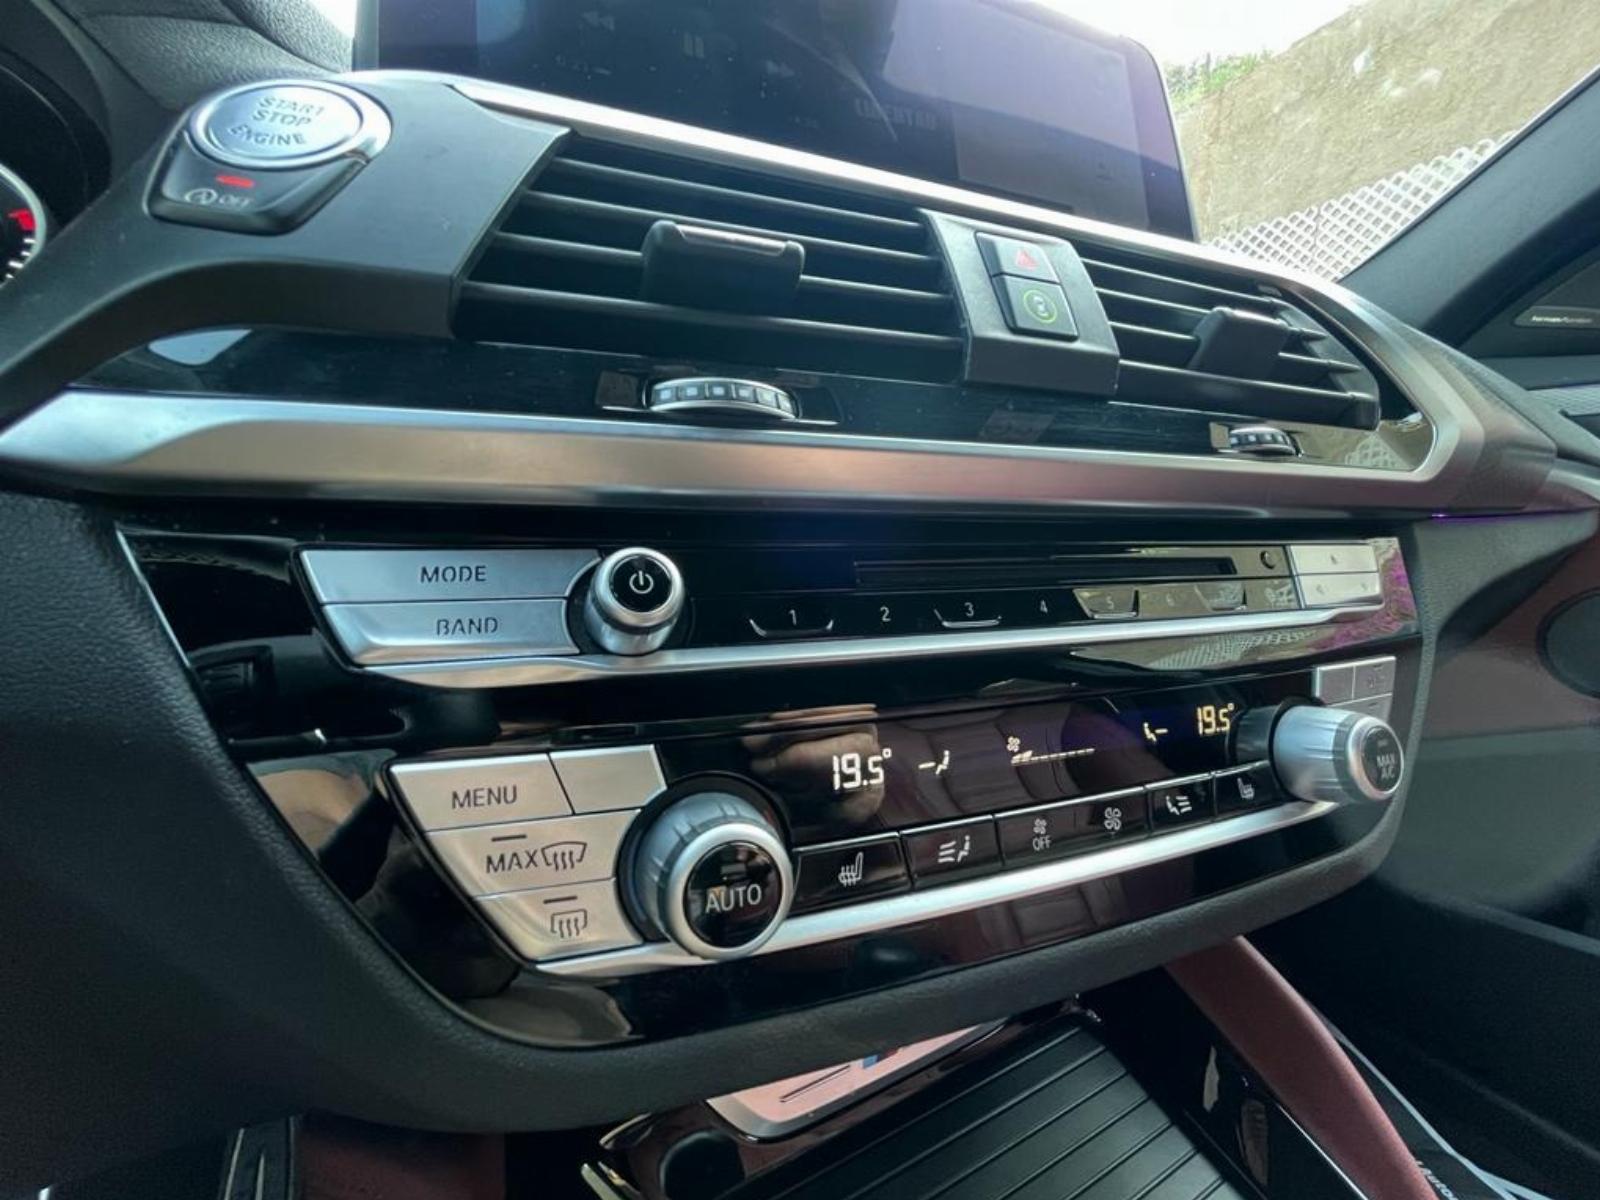 BMW X4 M40i 3.0 2020 SUV DEPORTIVA IMPECABLE - FULL MOTOR